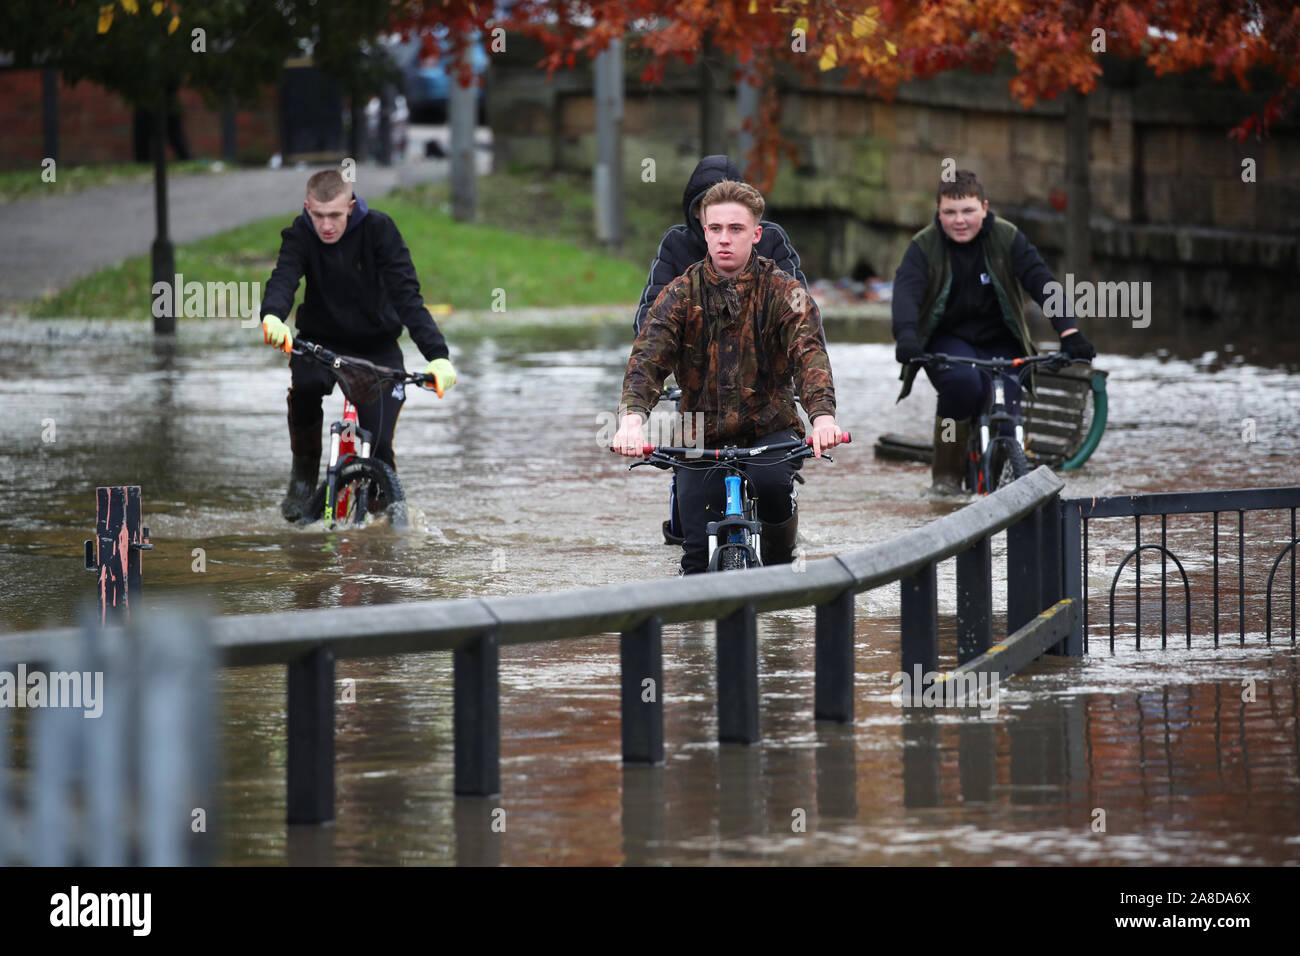 Teenagers ride their bikes through floodwater in Doncaster, Yorkshire, as parts of England endured a month's worth of rain in 24 hours, with scores of people rescued or forced to evacuate their homes, others stranded overnight in a shopping centre, and travel plans thrown into chaos. Stock Photo